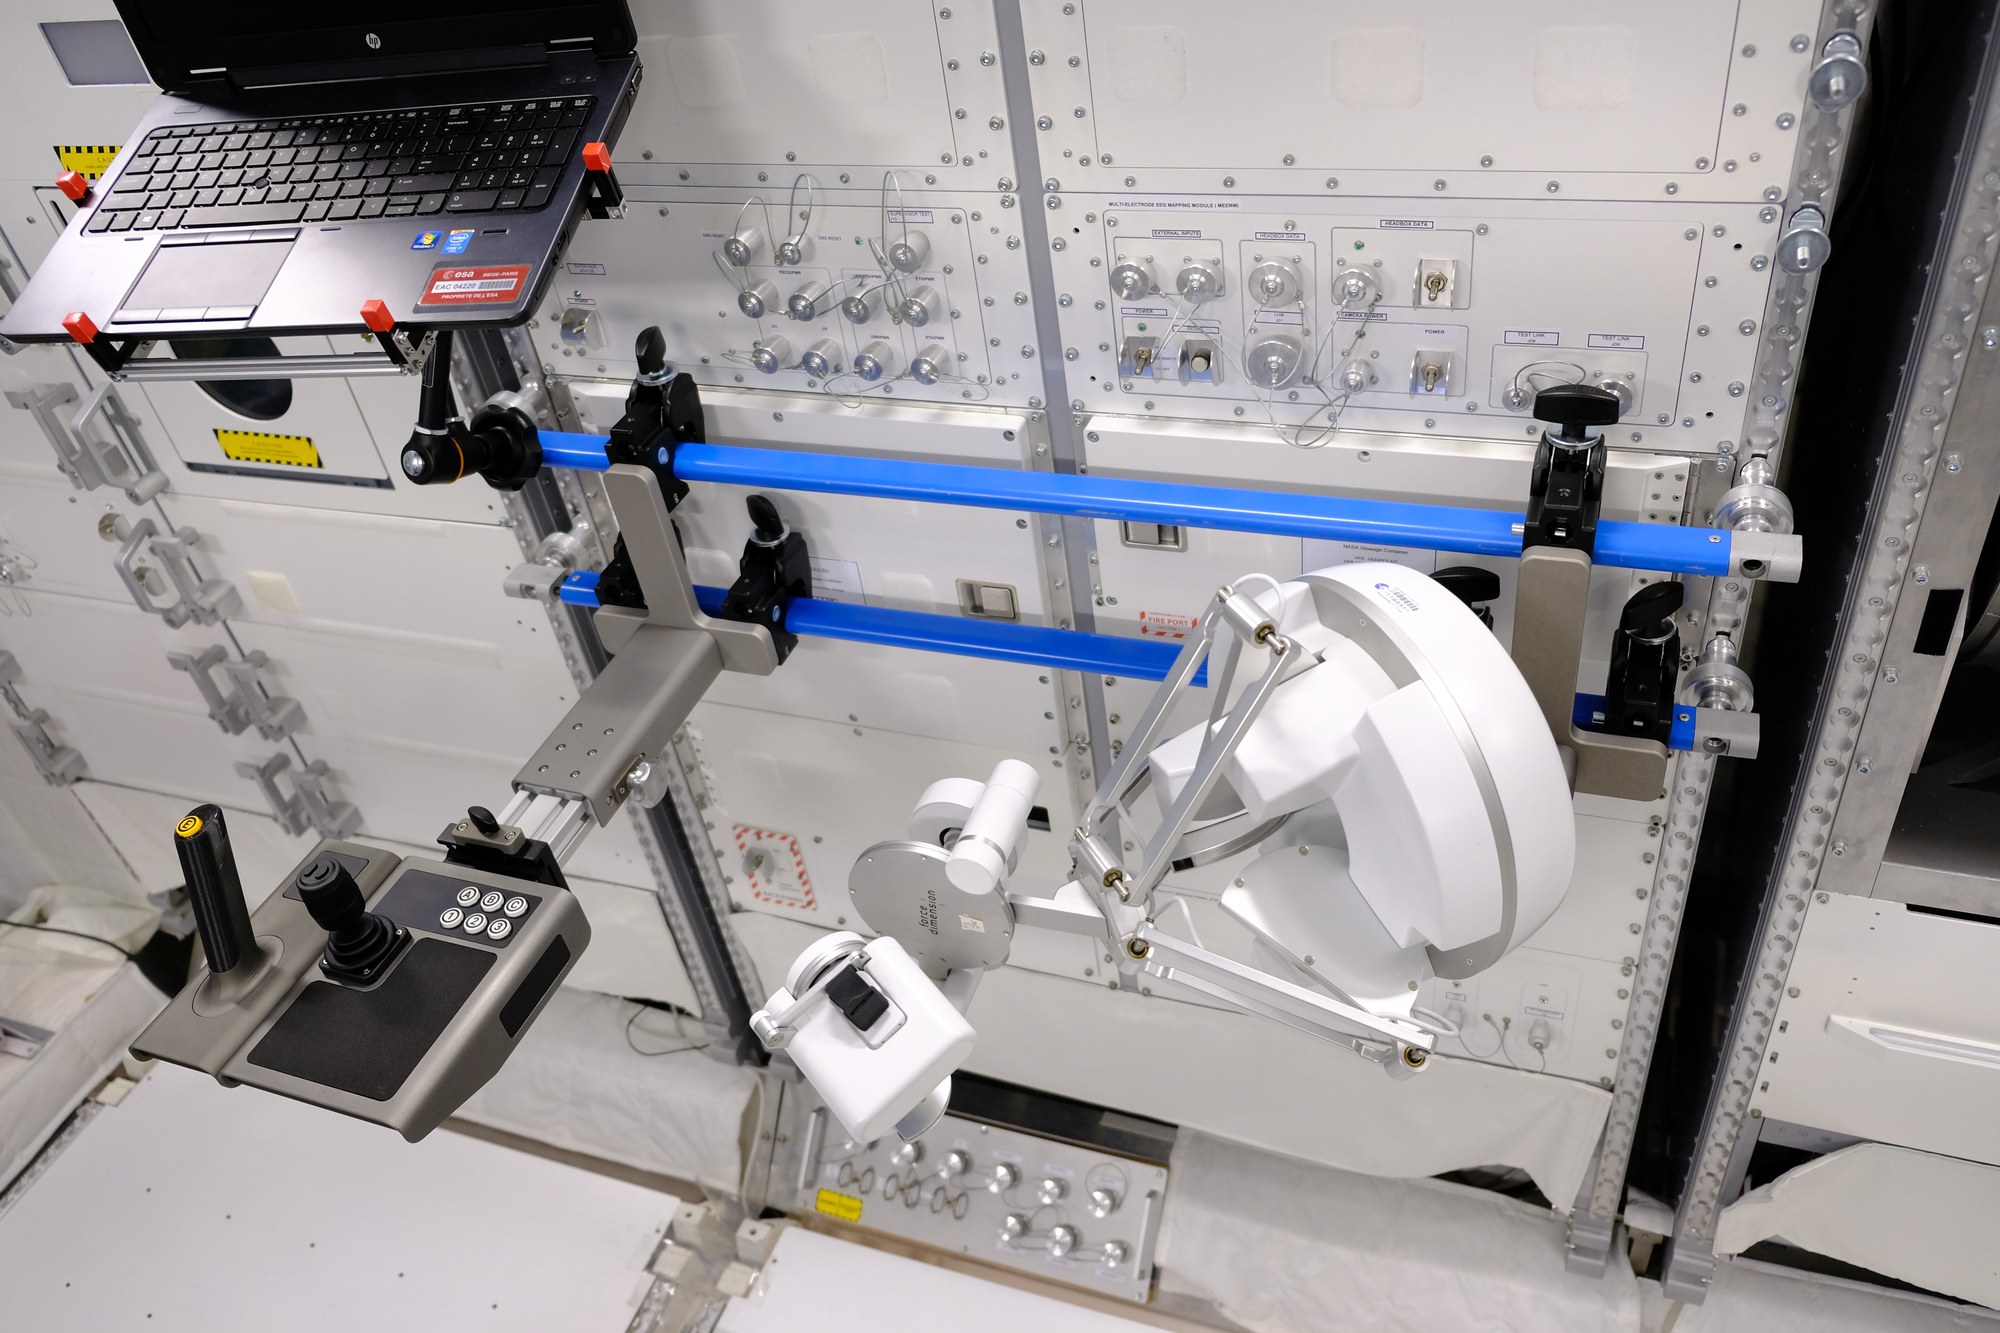 Control from space – Robot Command Terminal on board the ISS